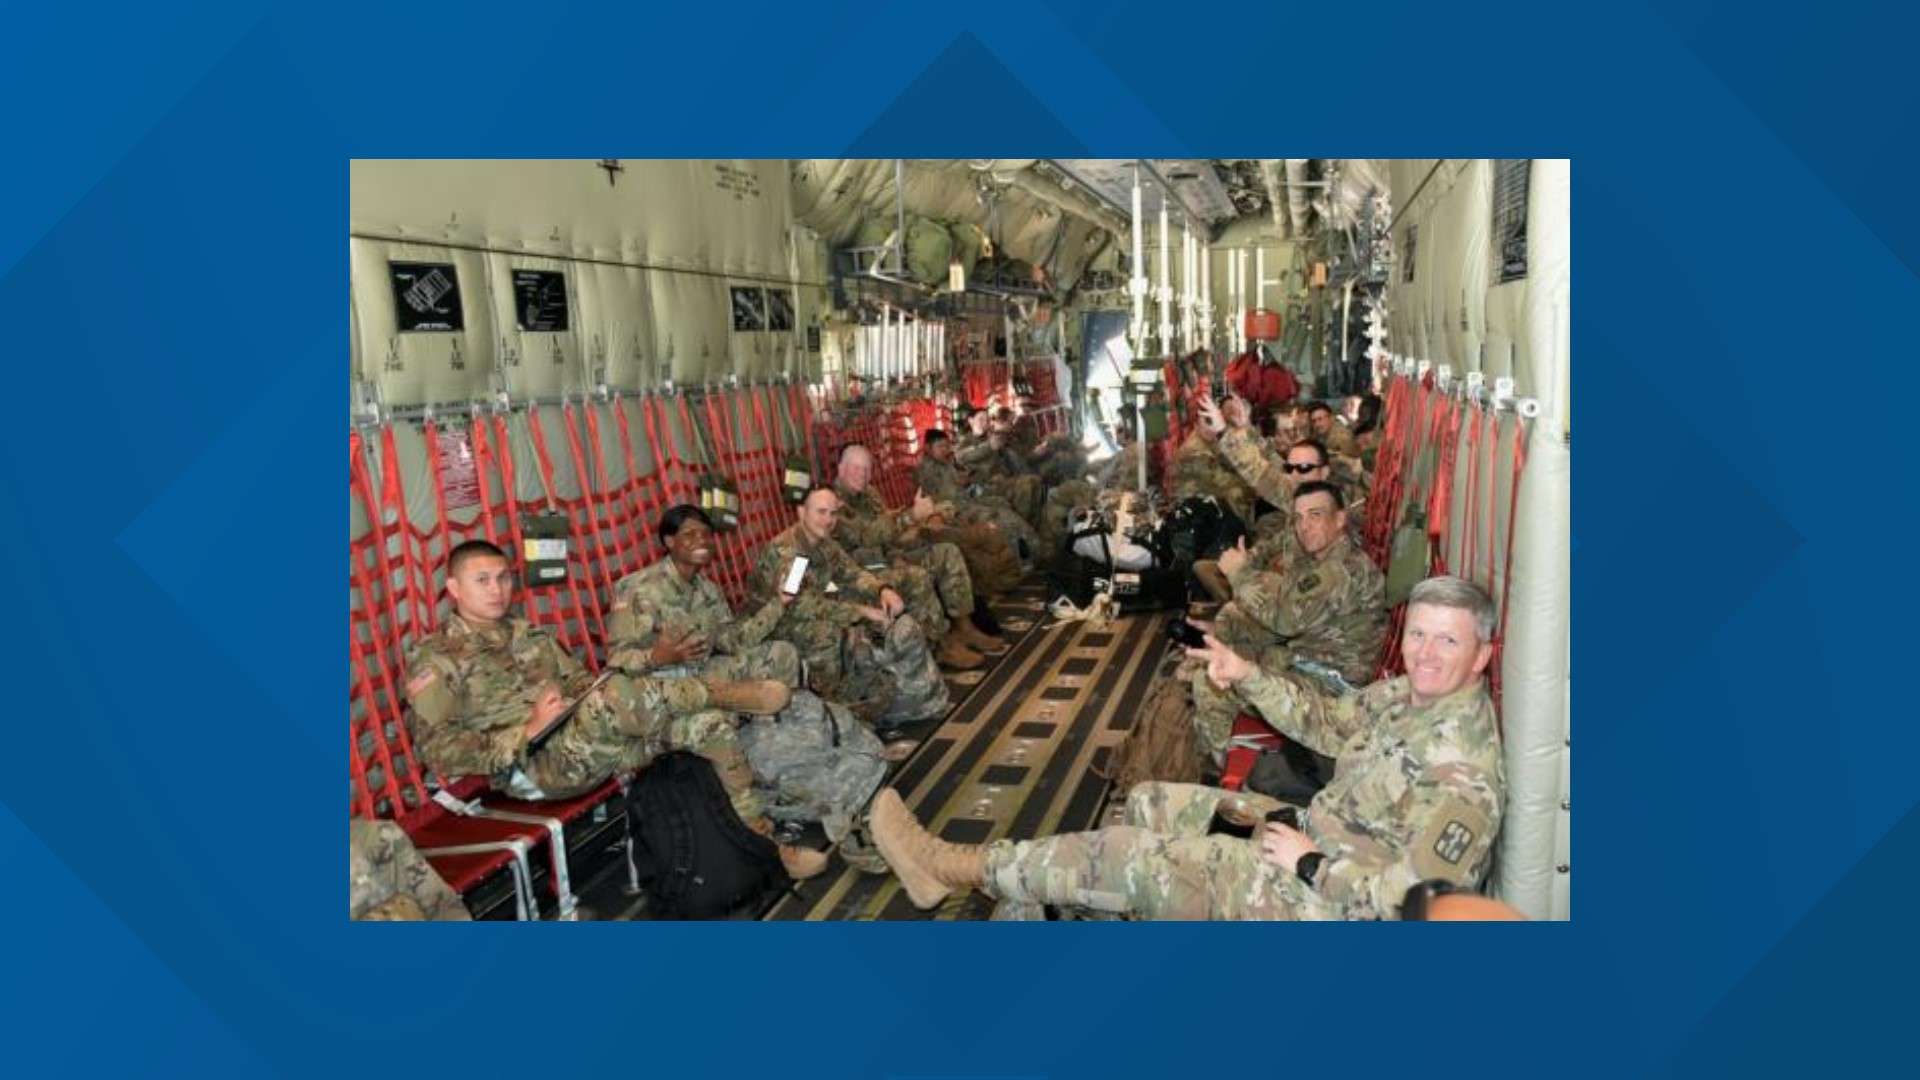 New York State leads the nation with the most coronavirus cases. Now, soldiers from our own back yard are there to help with the relief efforts.